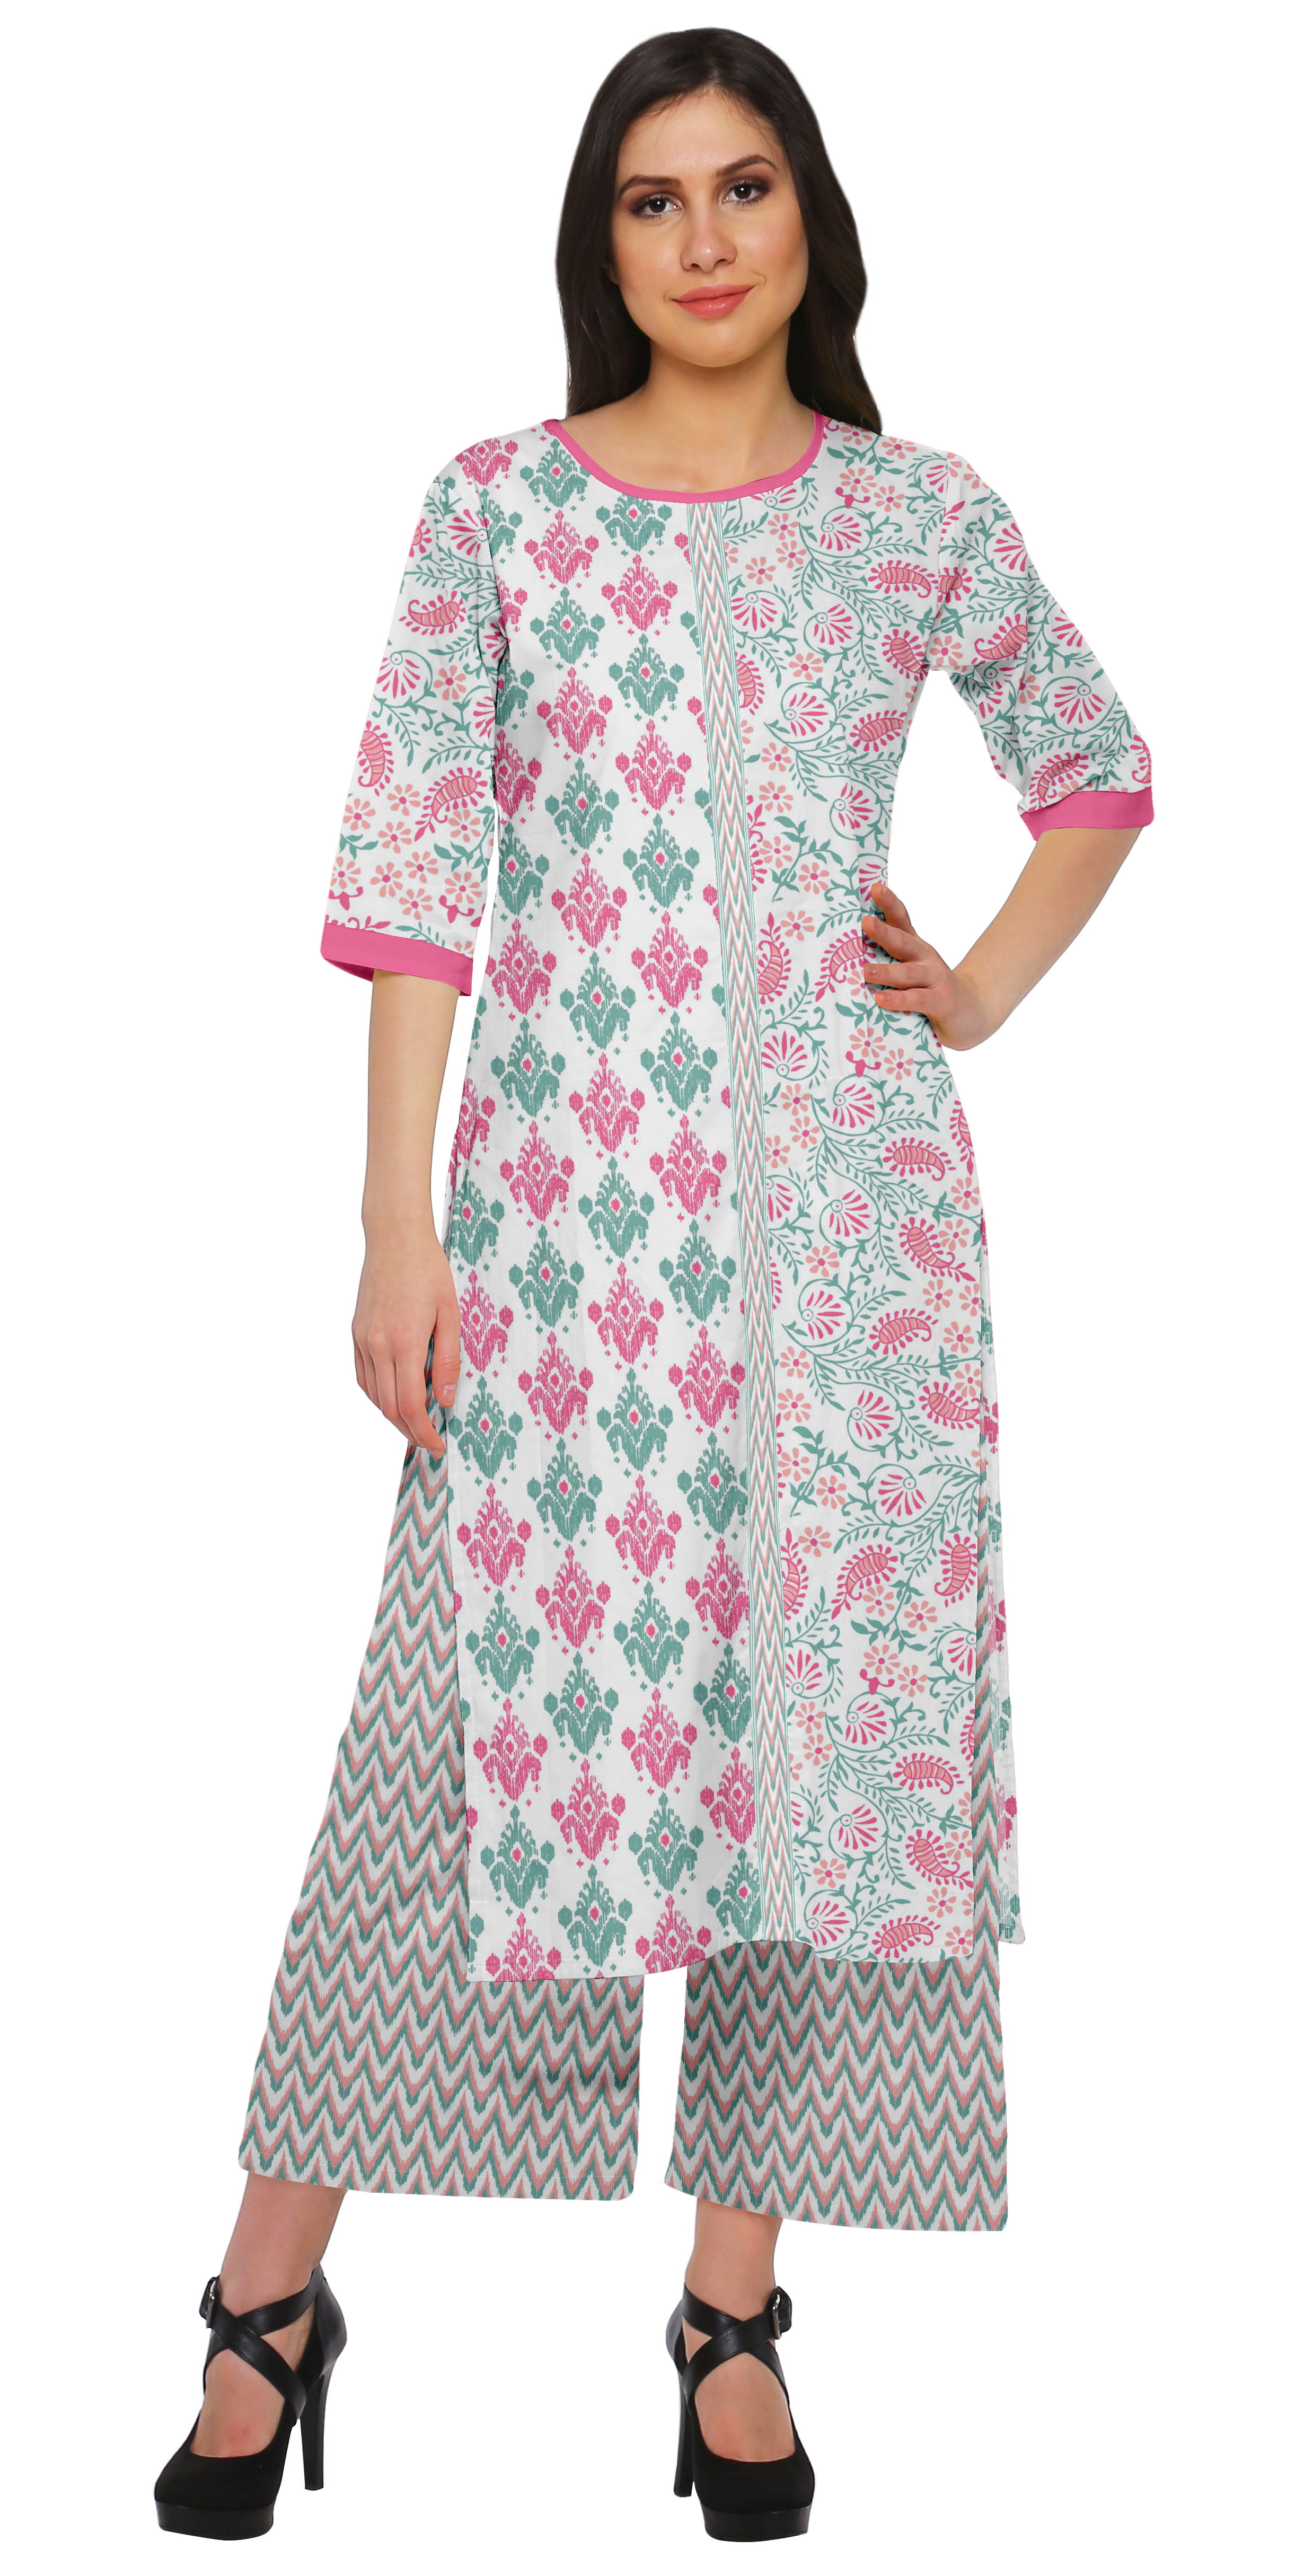 Buy Women's Crepe Printed Kurti (LAXTEXT_3.9-S_Multicolour_S) at Amazon.in